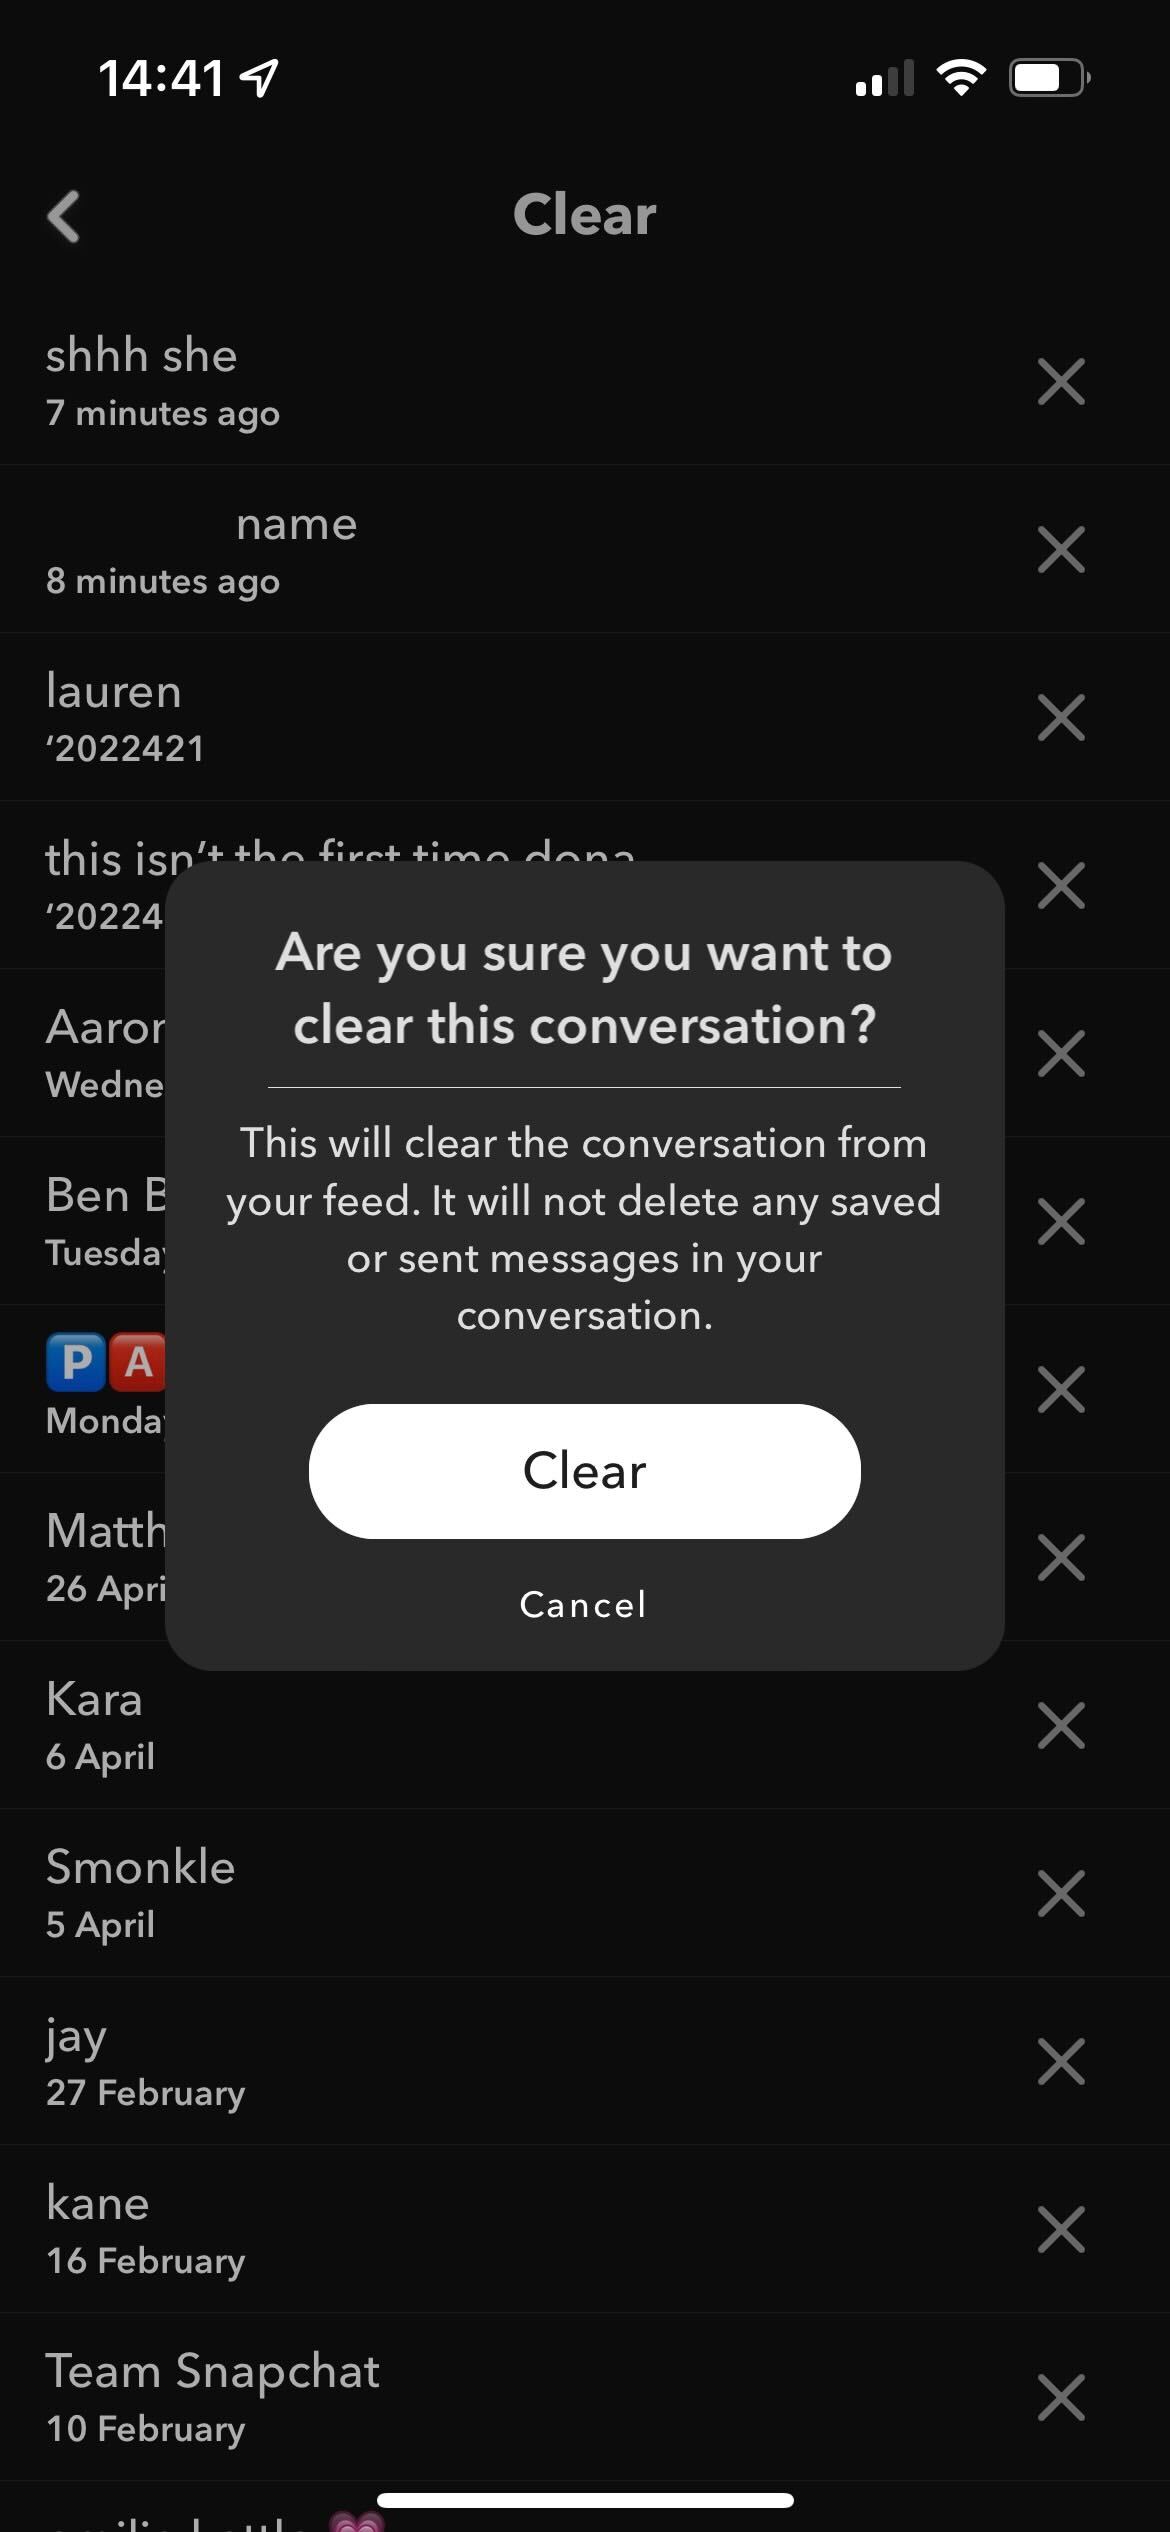 Press the clear button to delete the chat